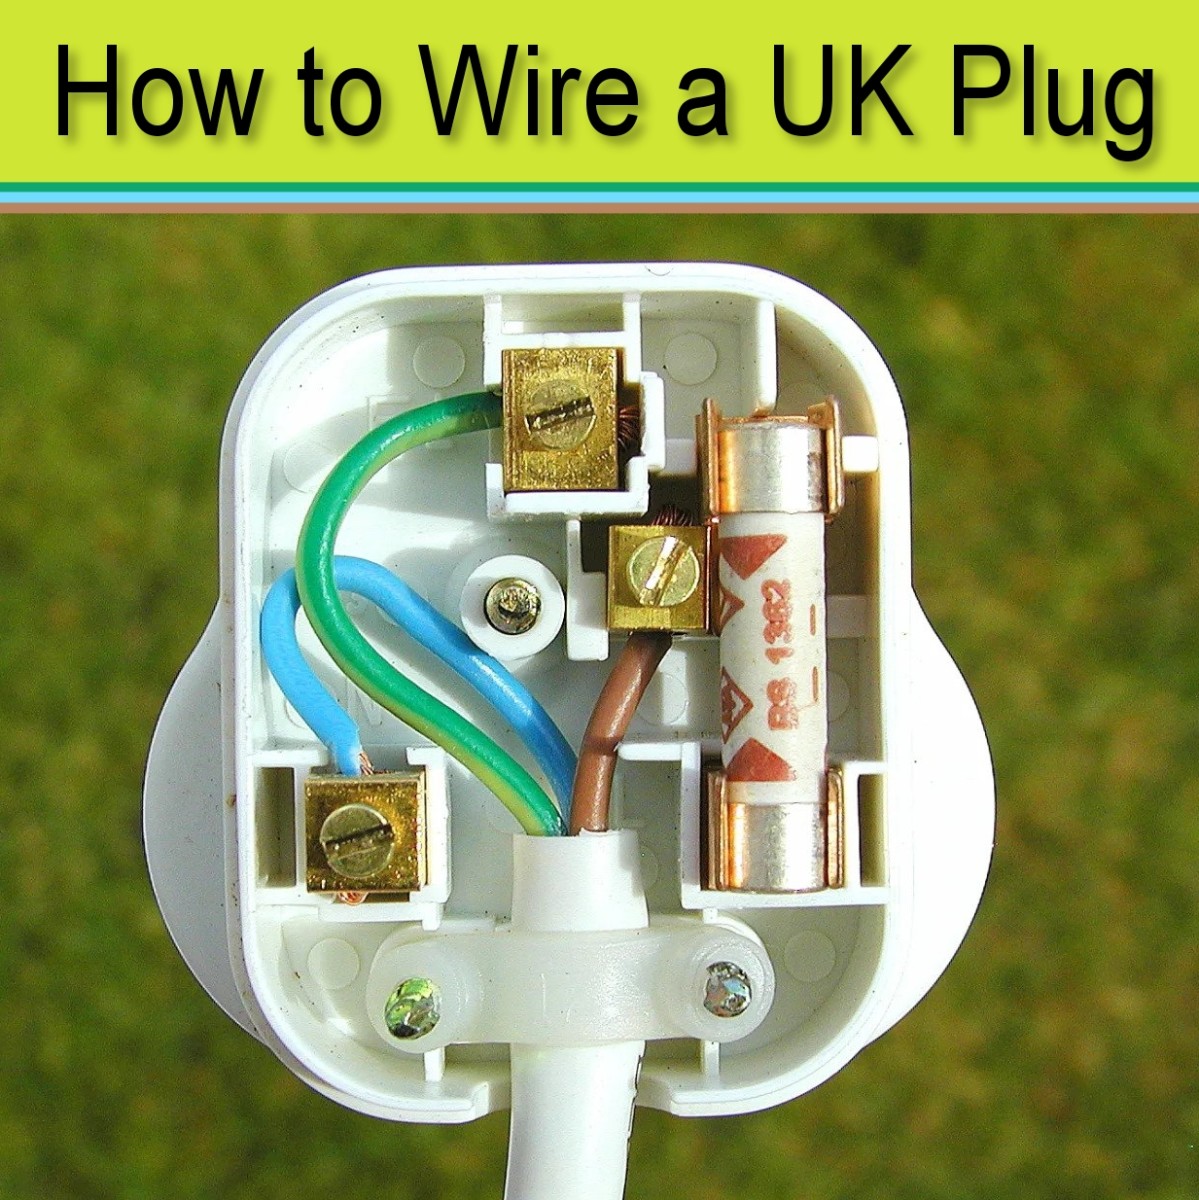 9 Easy Steps To Wiring A Plug Correctly And Safely Dengarden Home And Garden